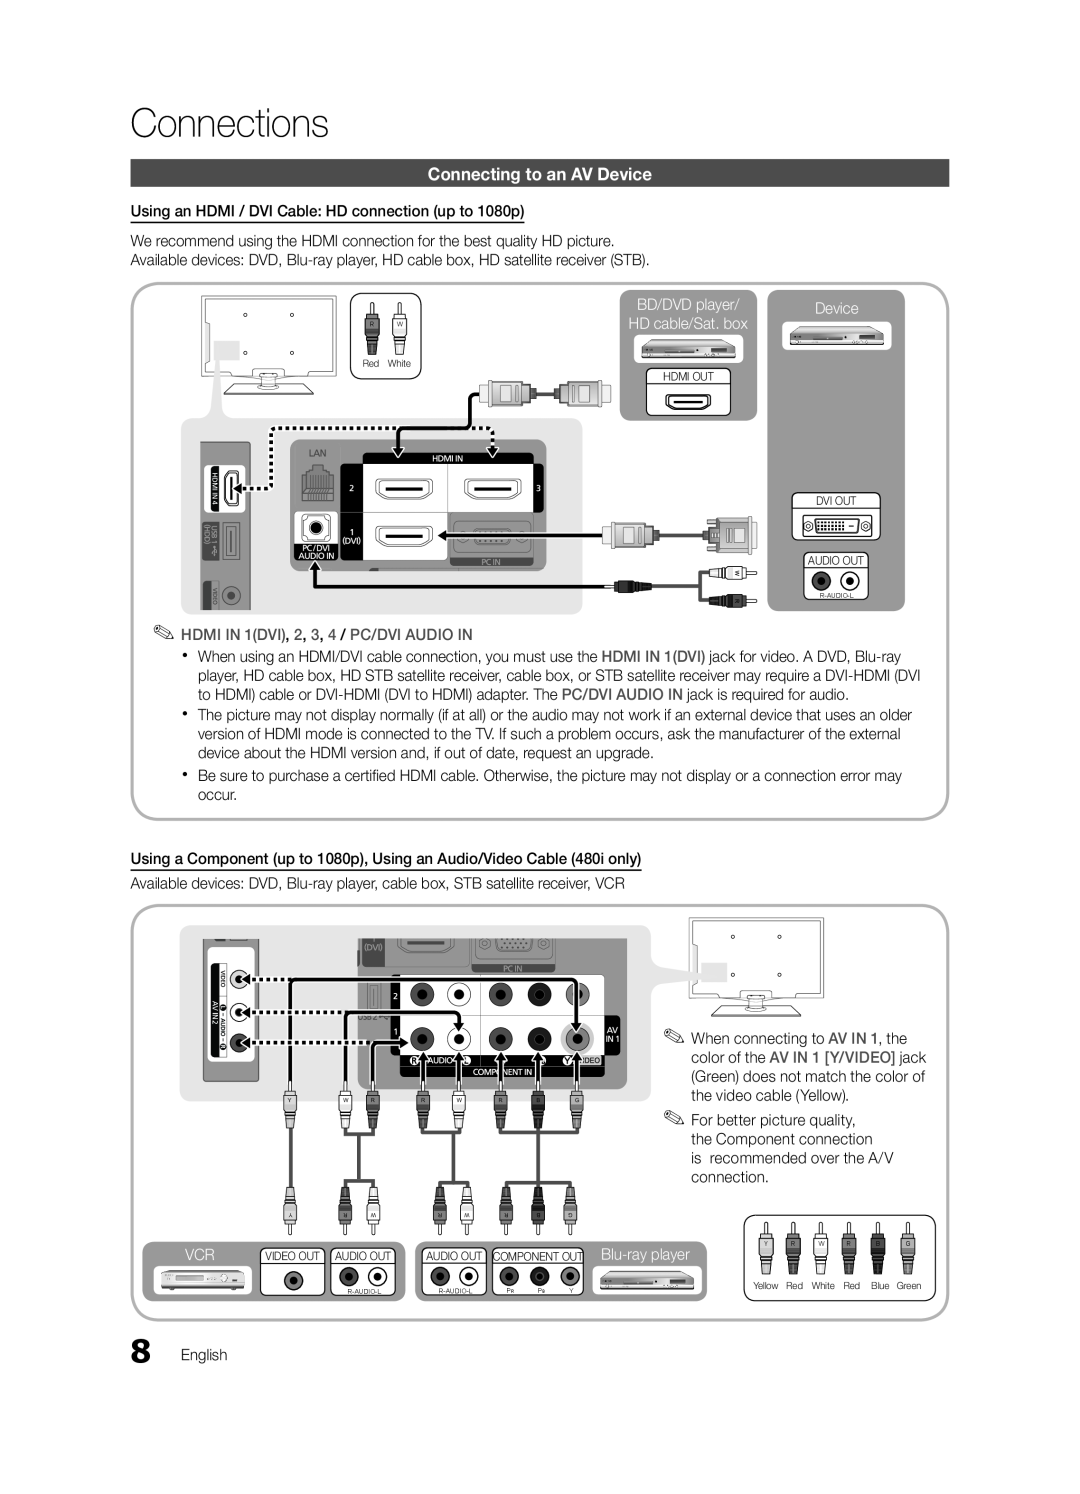 Samsung LN32C550 user manual Connections, Connecting to an AV Device, HDMI IN 1DVI, 2, 3, 4 / PC/DVI AUDIO IN 